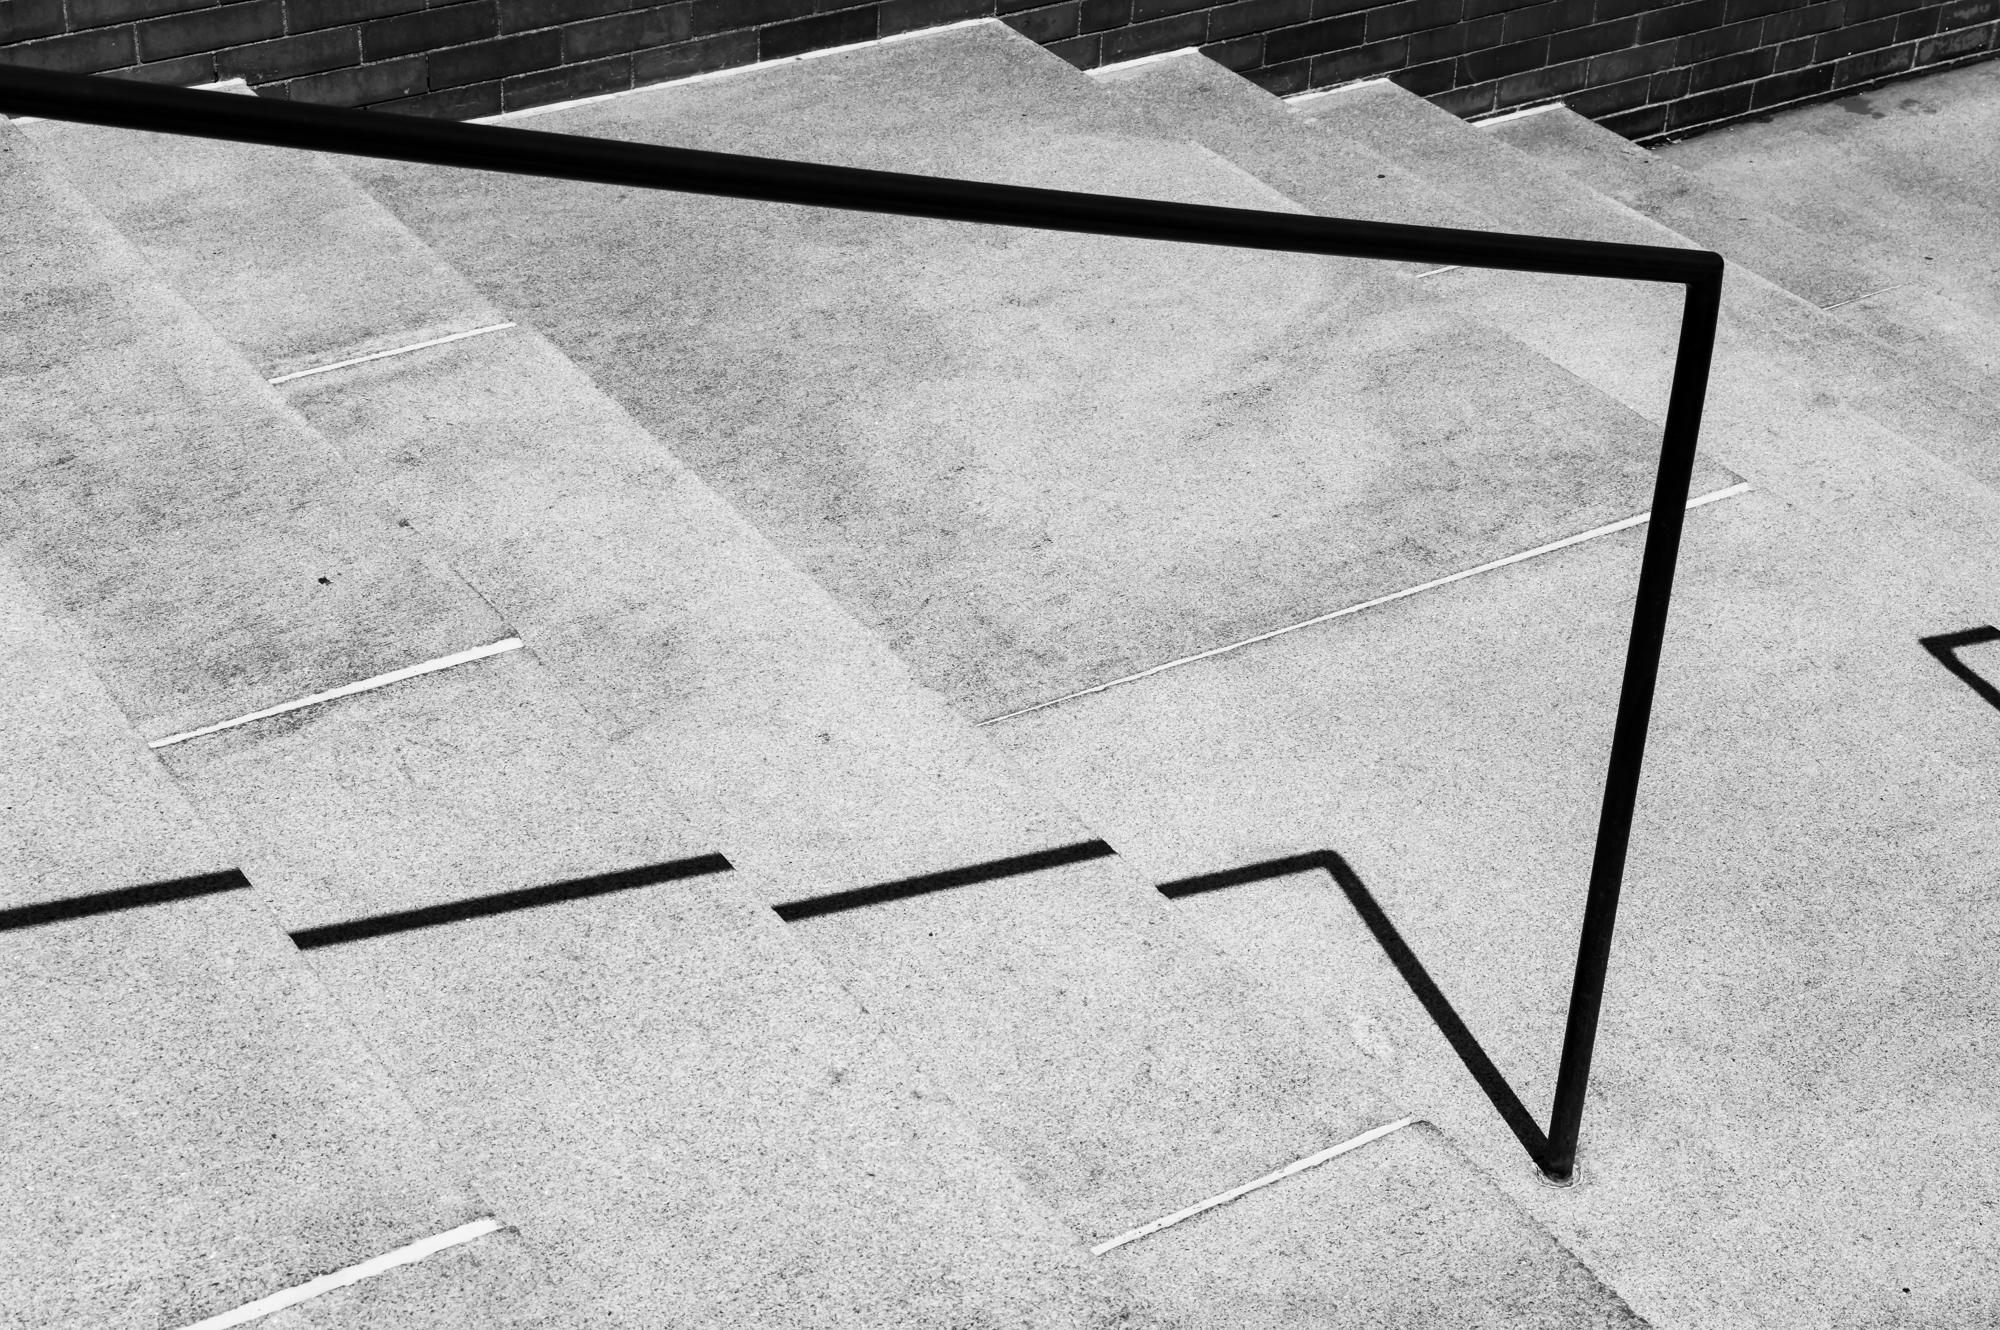  Limited Edition Black and White Photograph, Geometric #2 -  2018. Photographs are everywhere even in the most mundane. This is titled
Broken Shadow.

About Howard Lewis:
Lewis’ artistic practice often explores science, engineering, technology, and